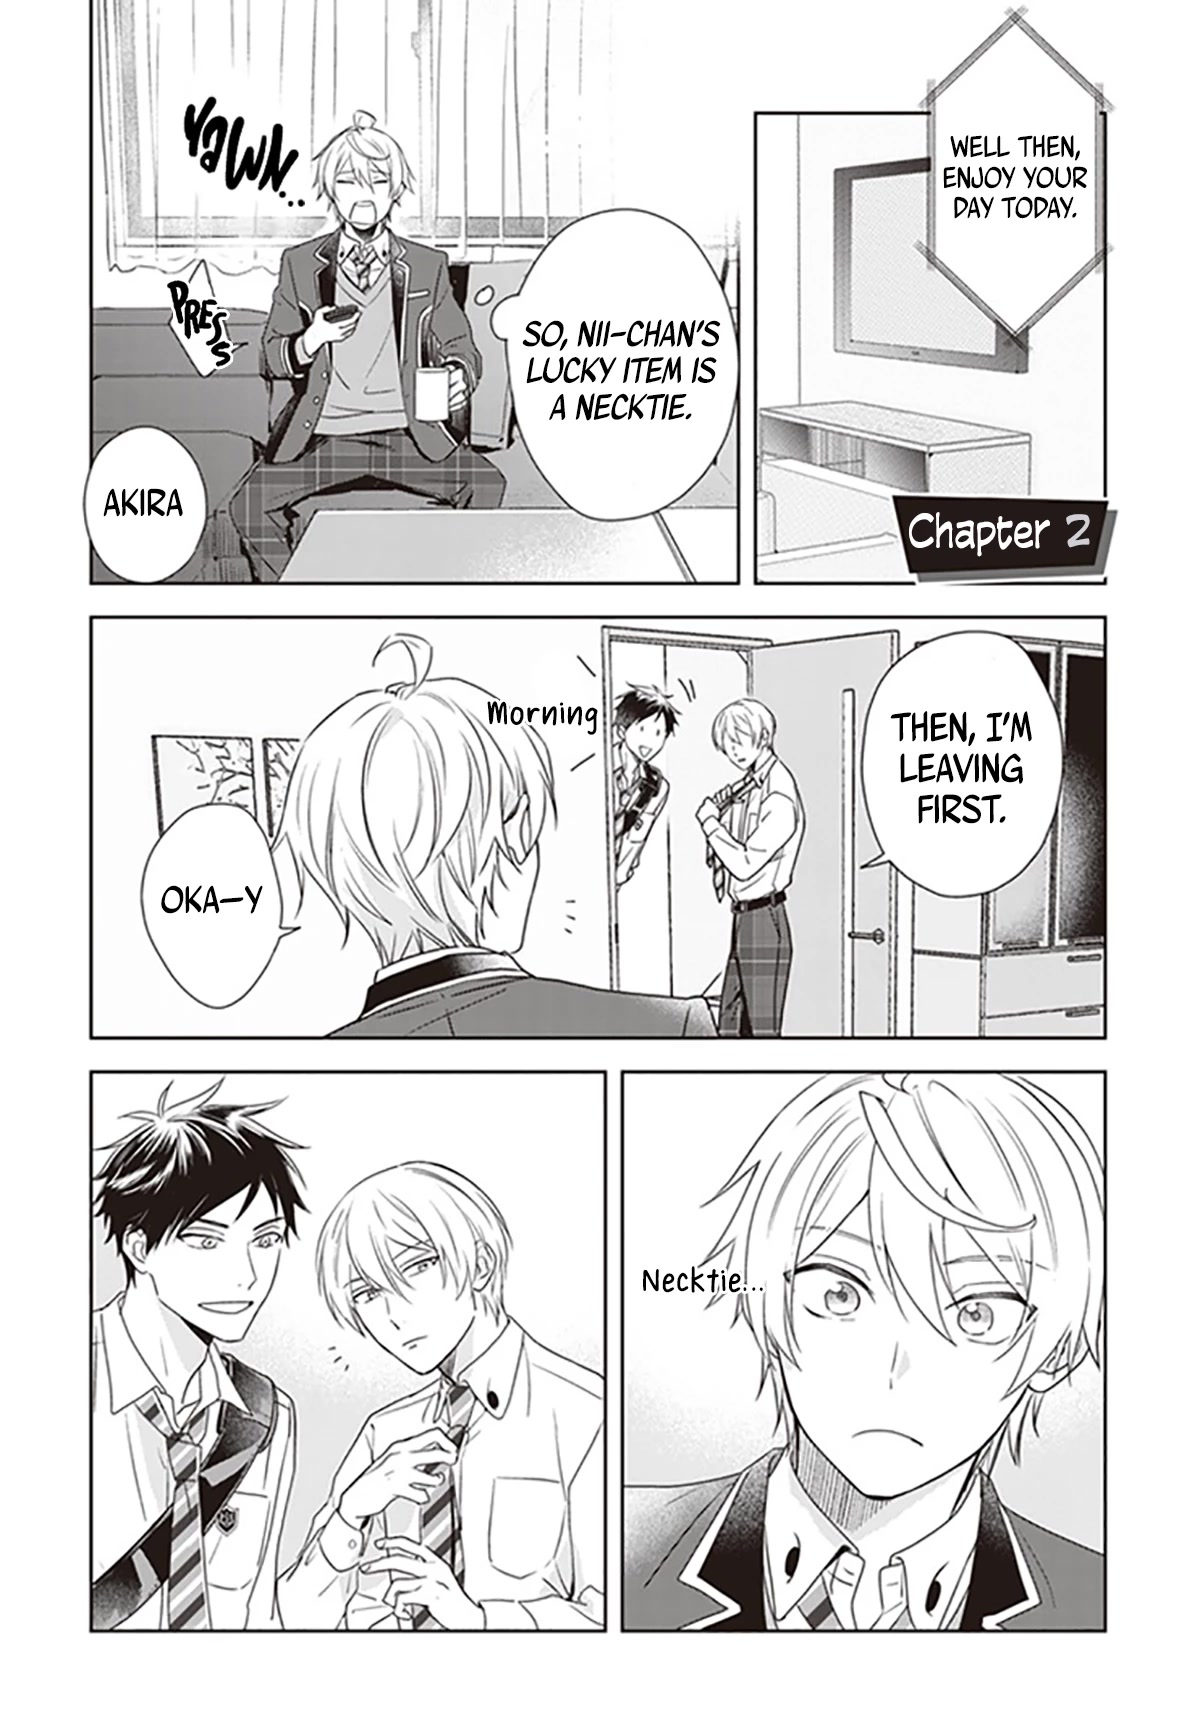 I Realized I Am The Younger Brother Of The Protagonist In A Bl Game - Page 2